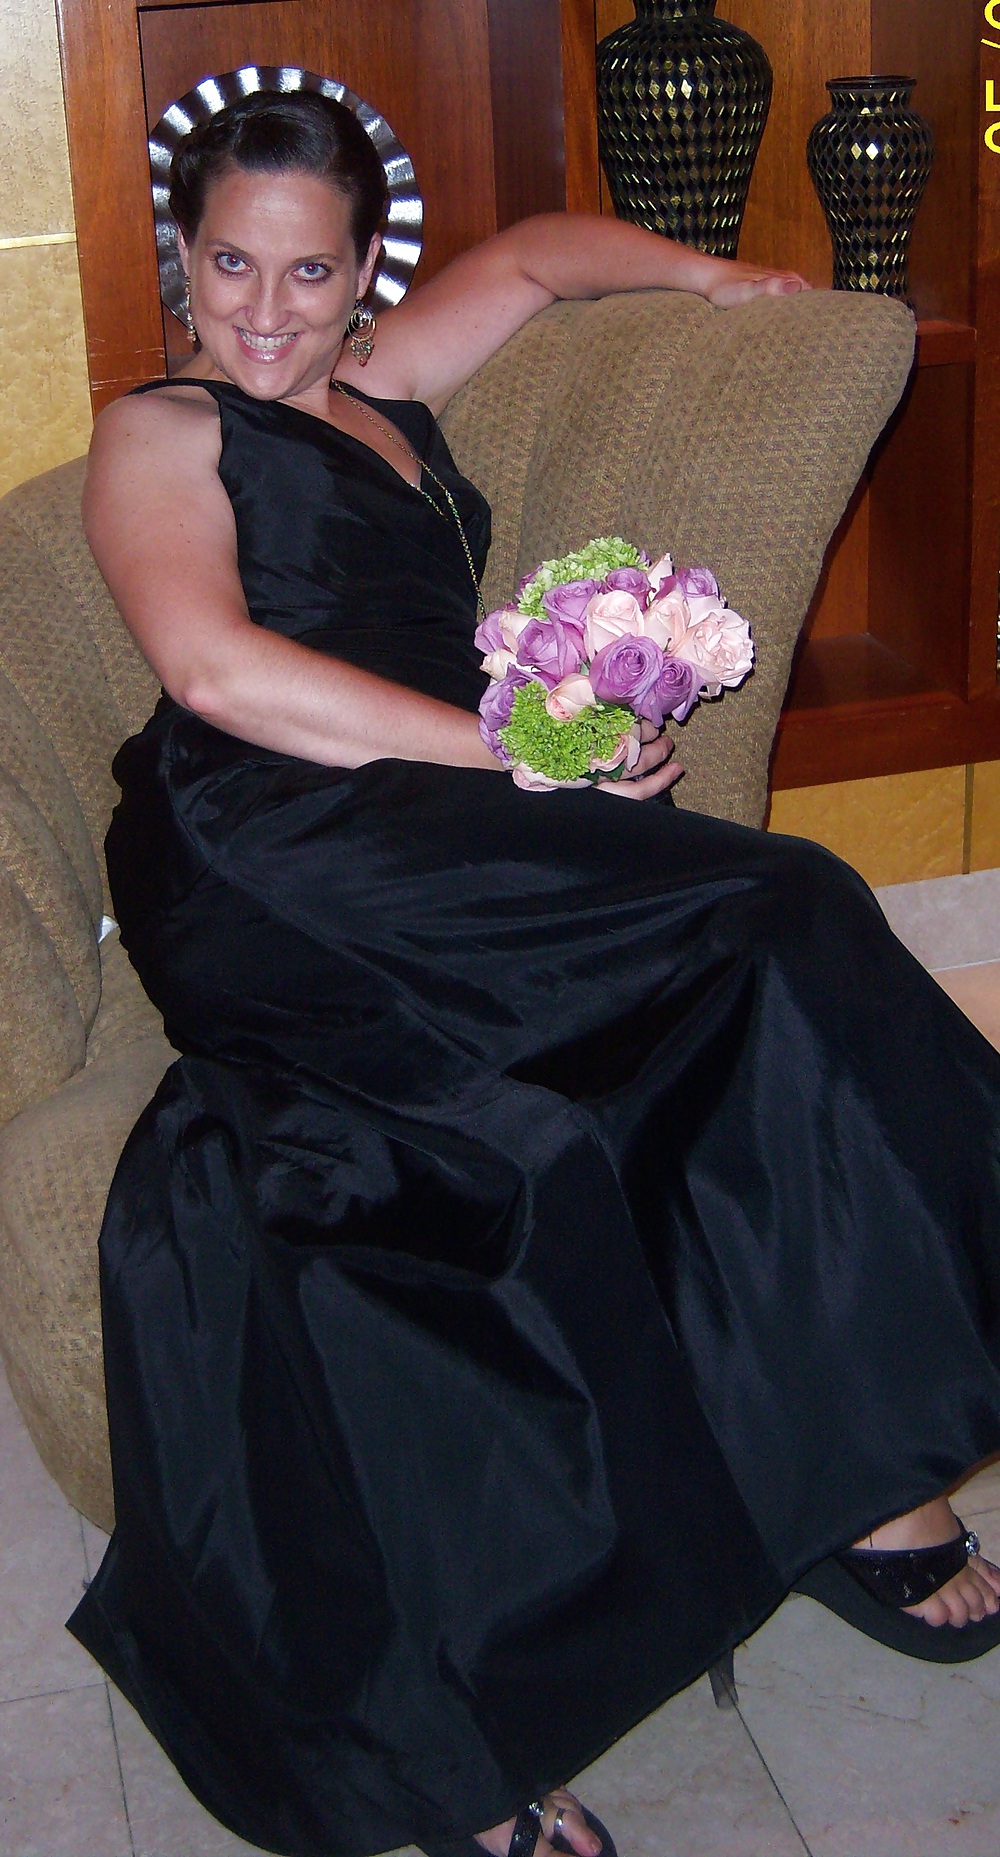 At a Wedding in my Black Gown #9487037